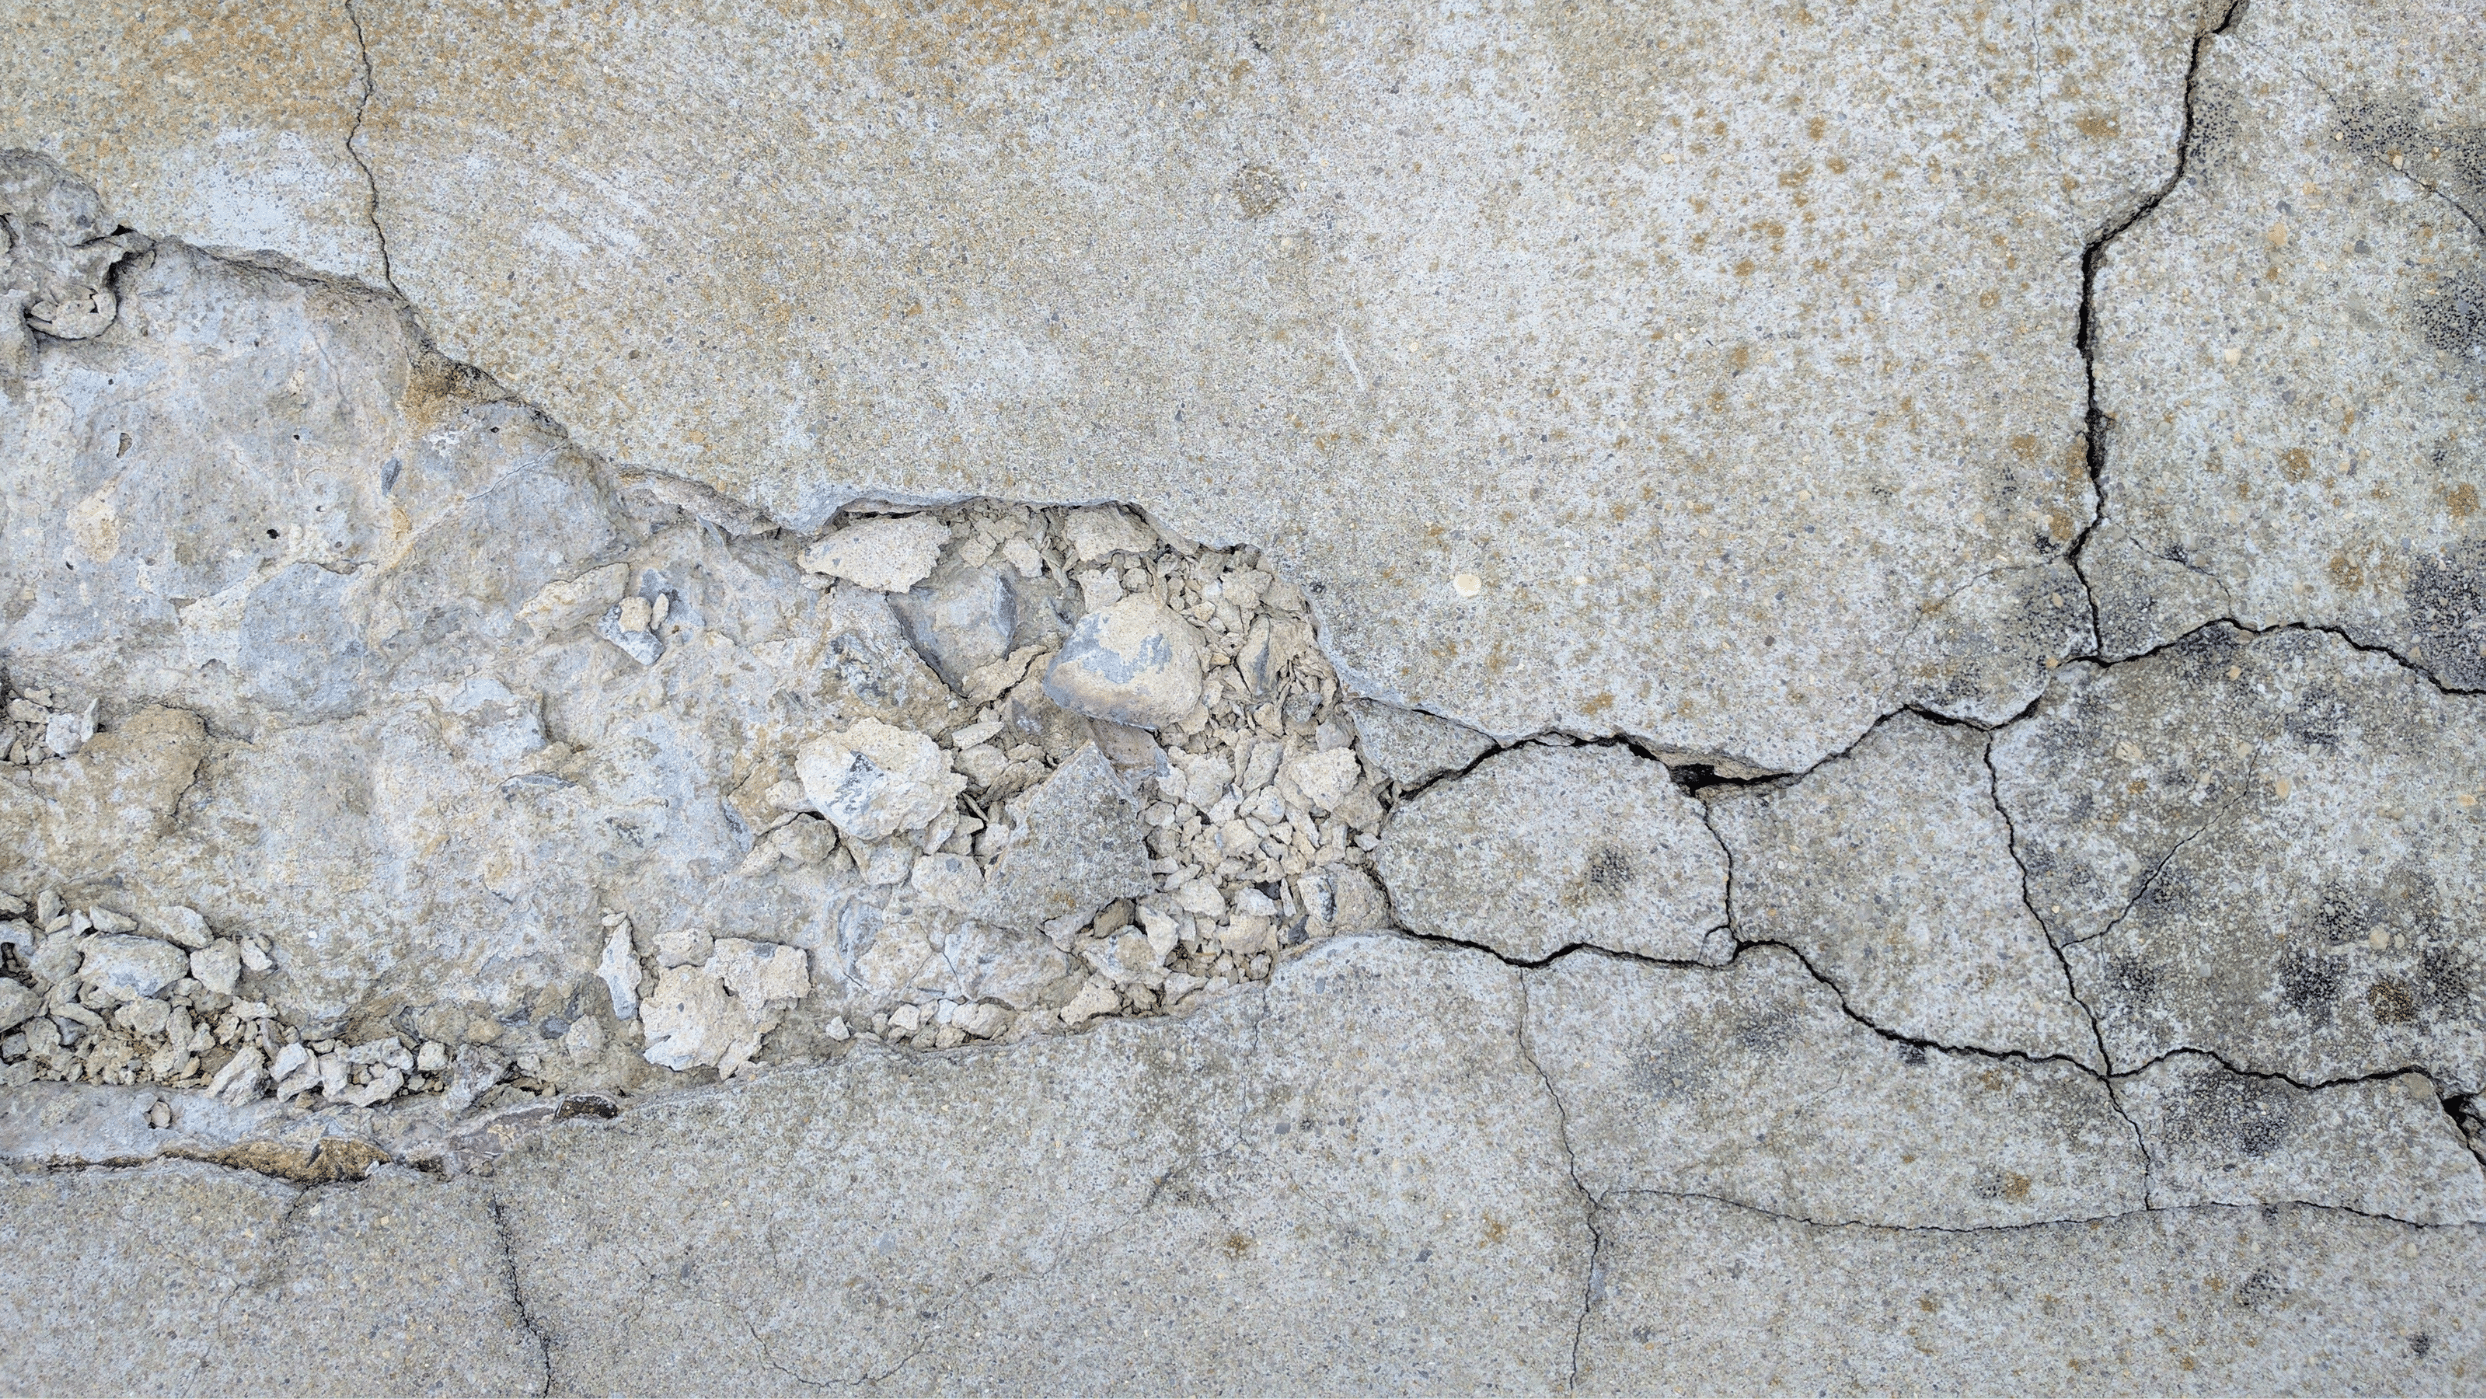 Cracked Concrete, Concrete Driveway Replacement may be required